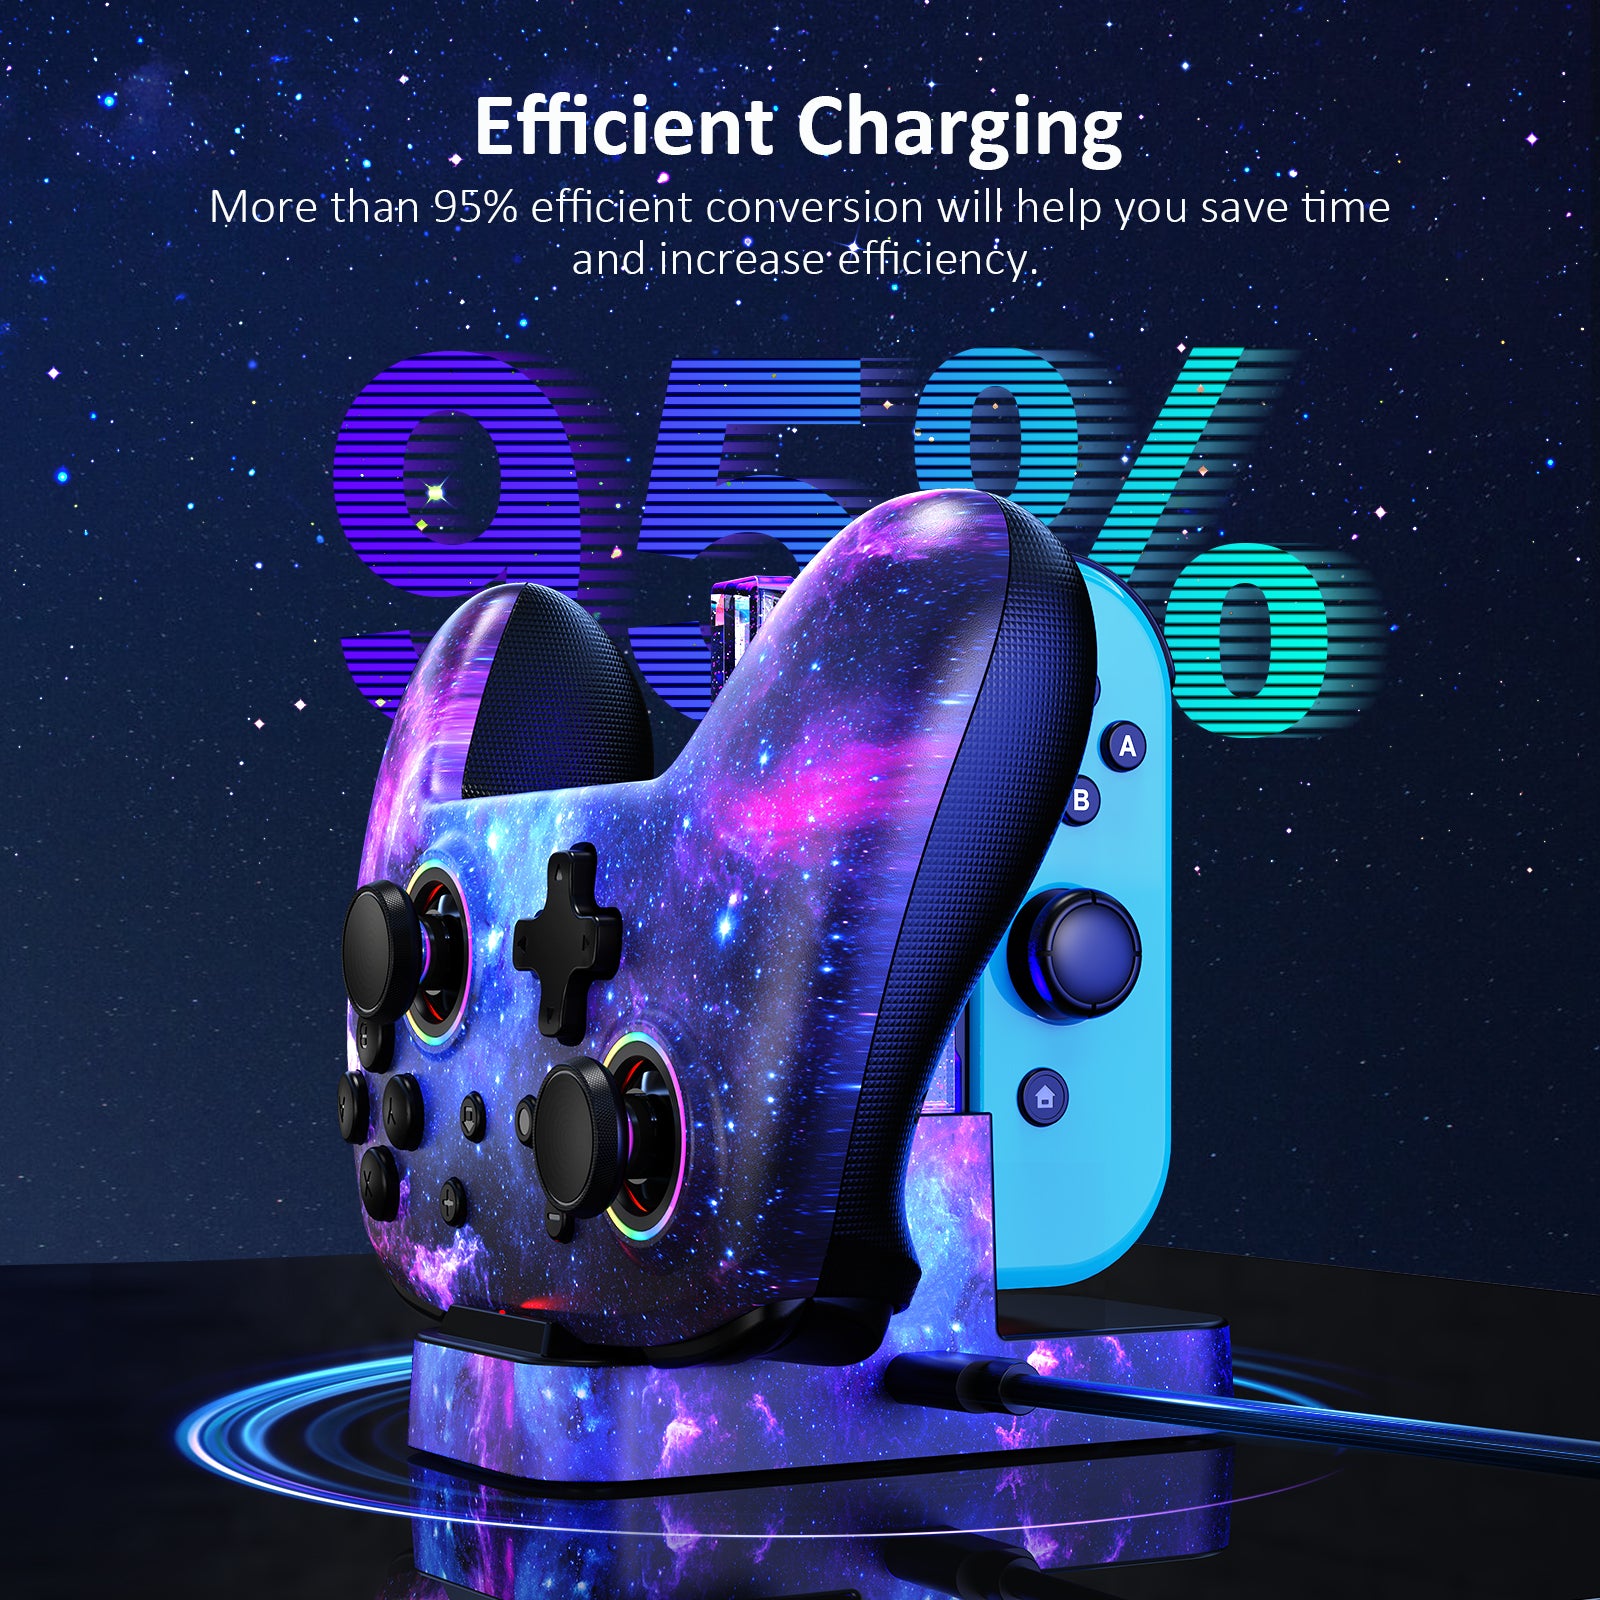 This charging dock with over 95% efficient conversion can greatly save time and improve efficiency.